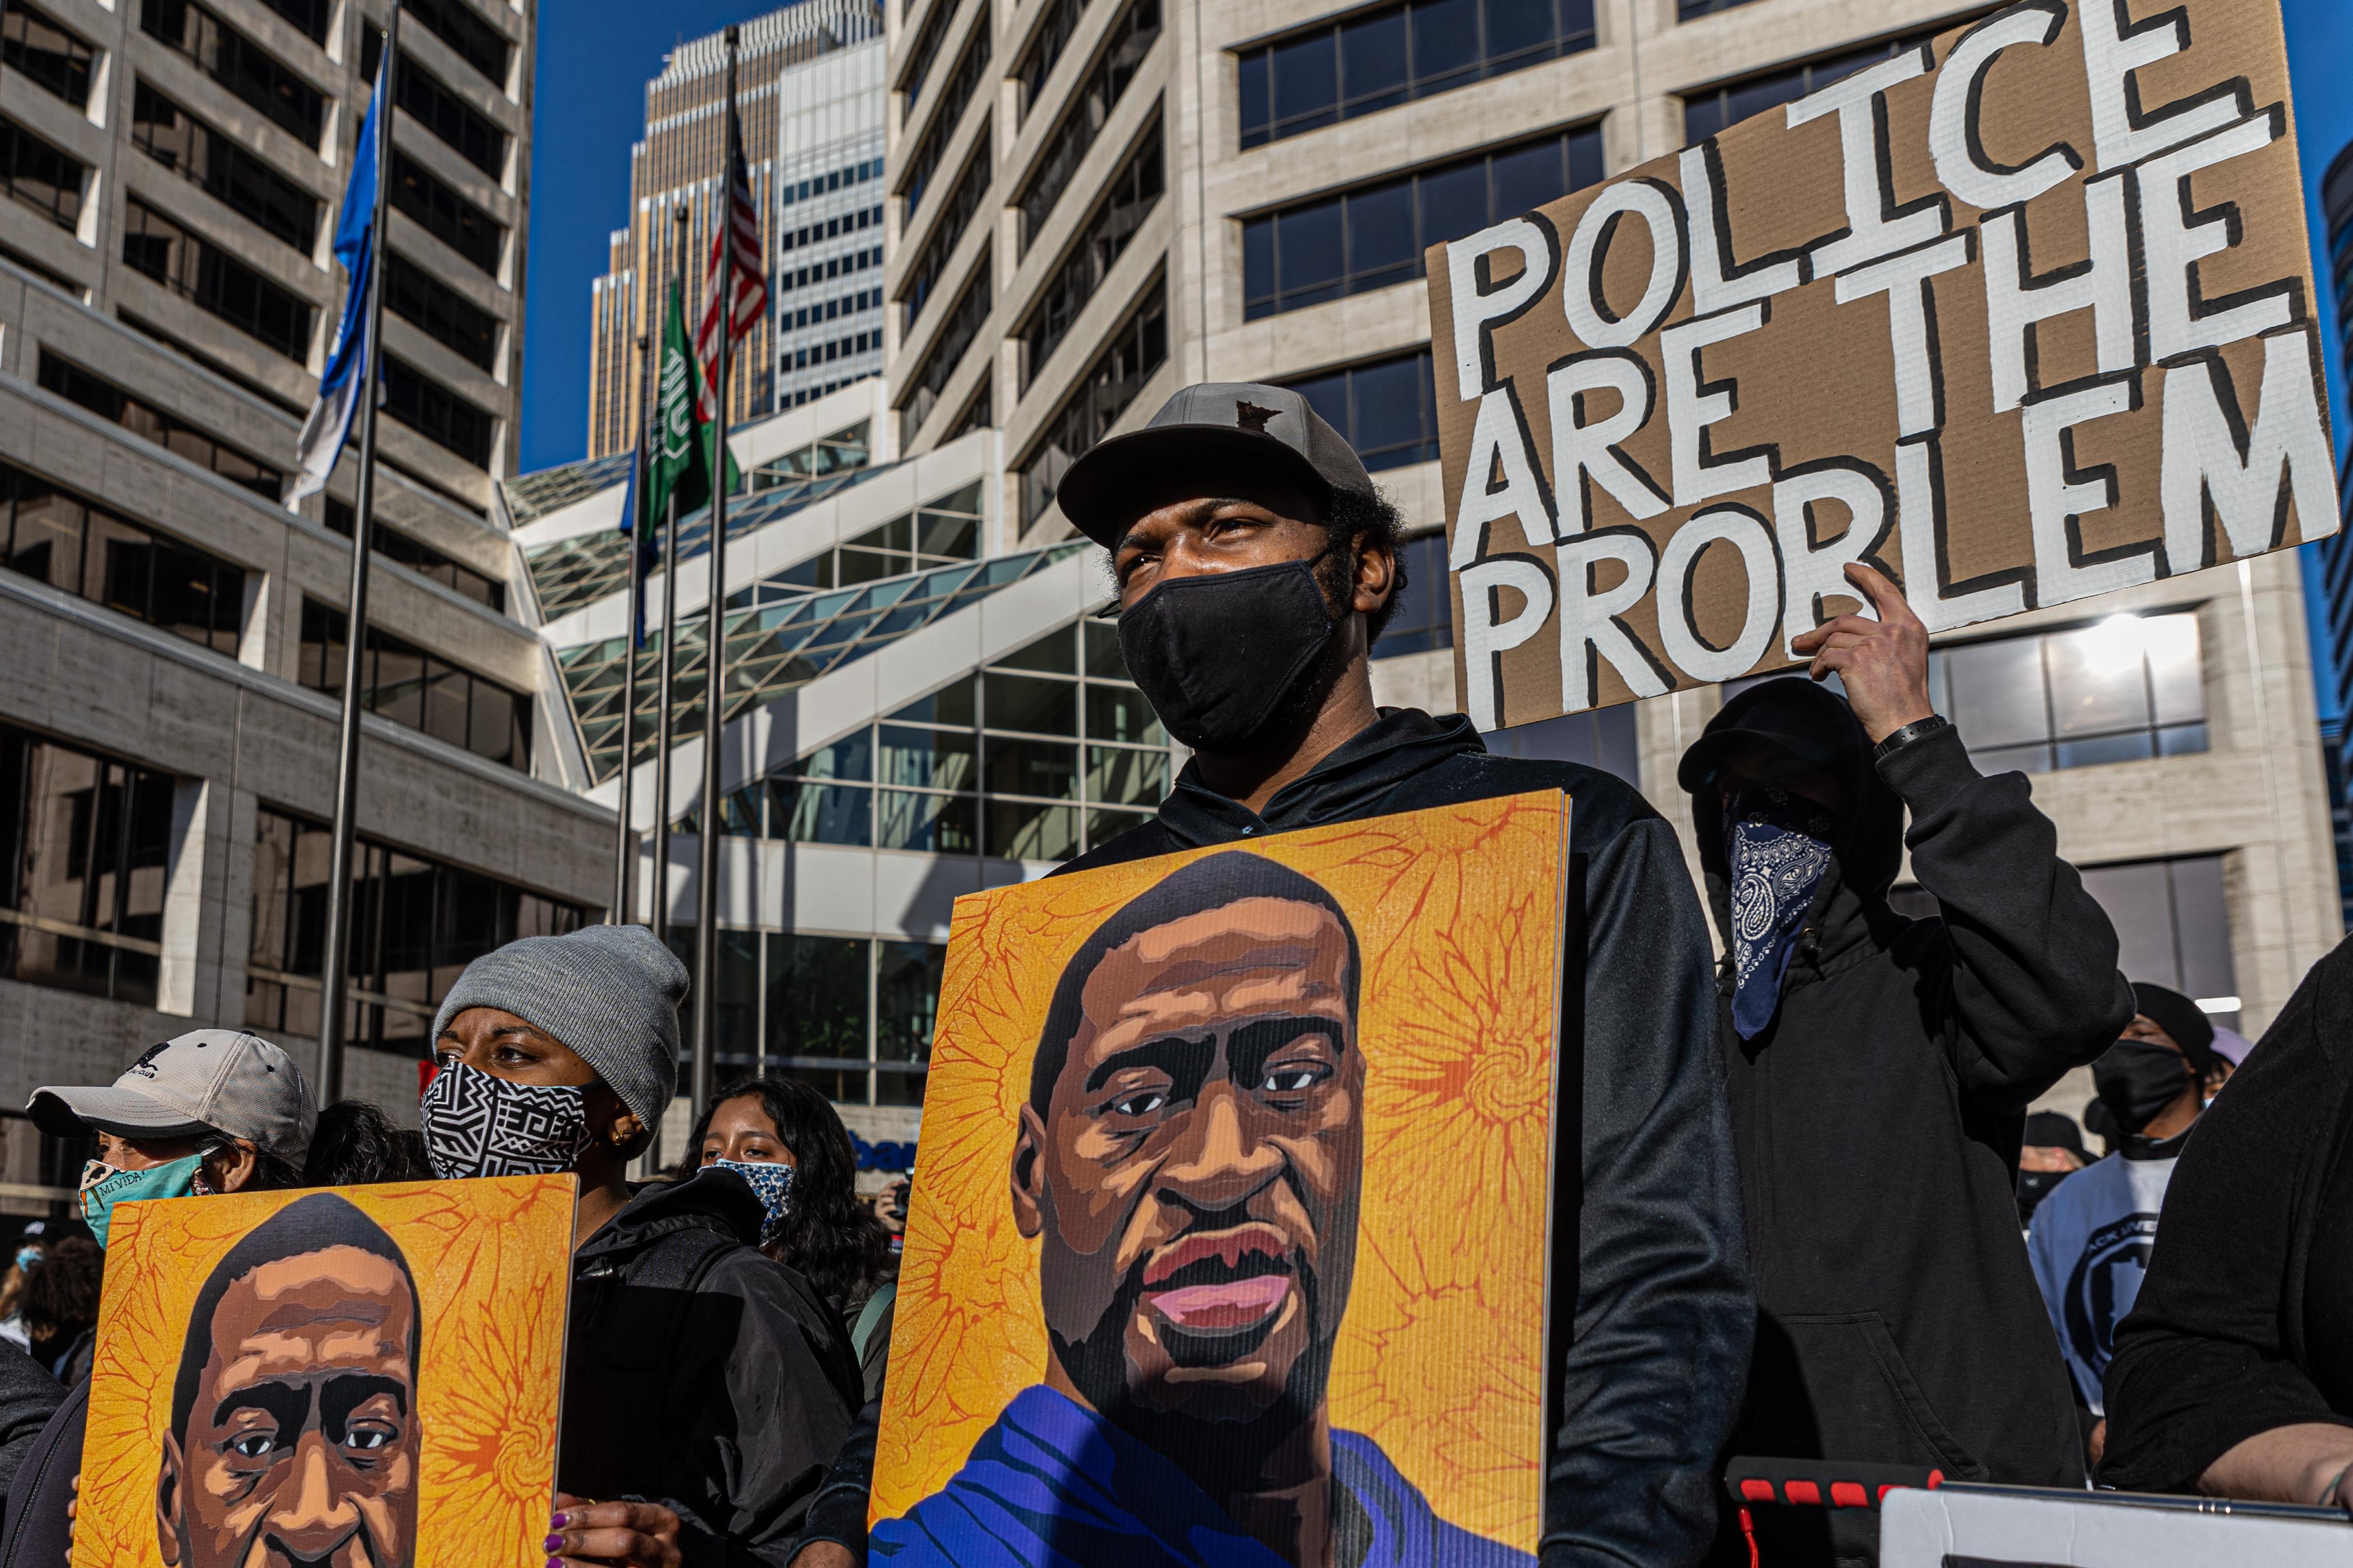 Protesters in masks hold up paintings of George Floyd and signs that say things like, "Police are the problem."